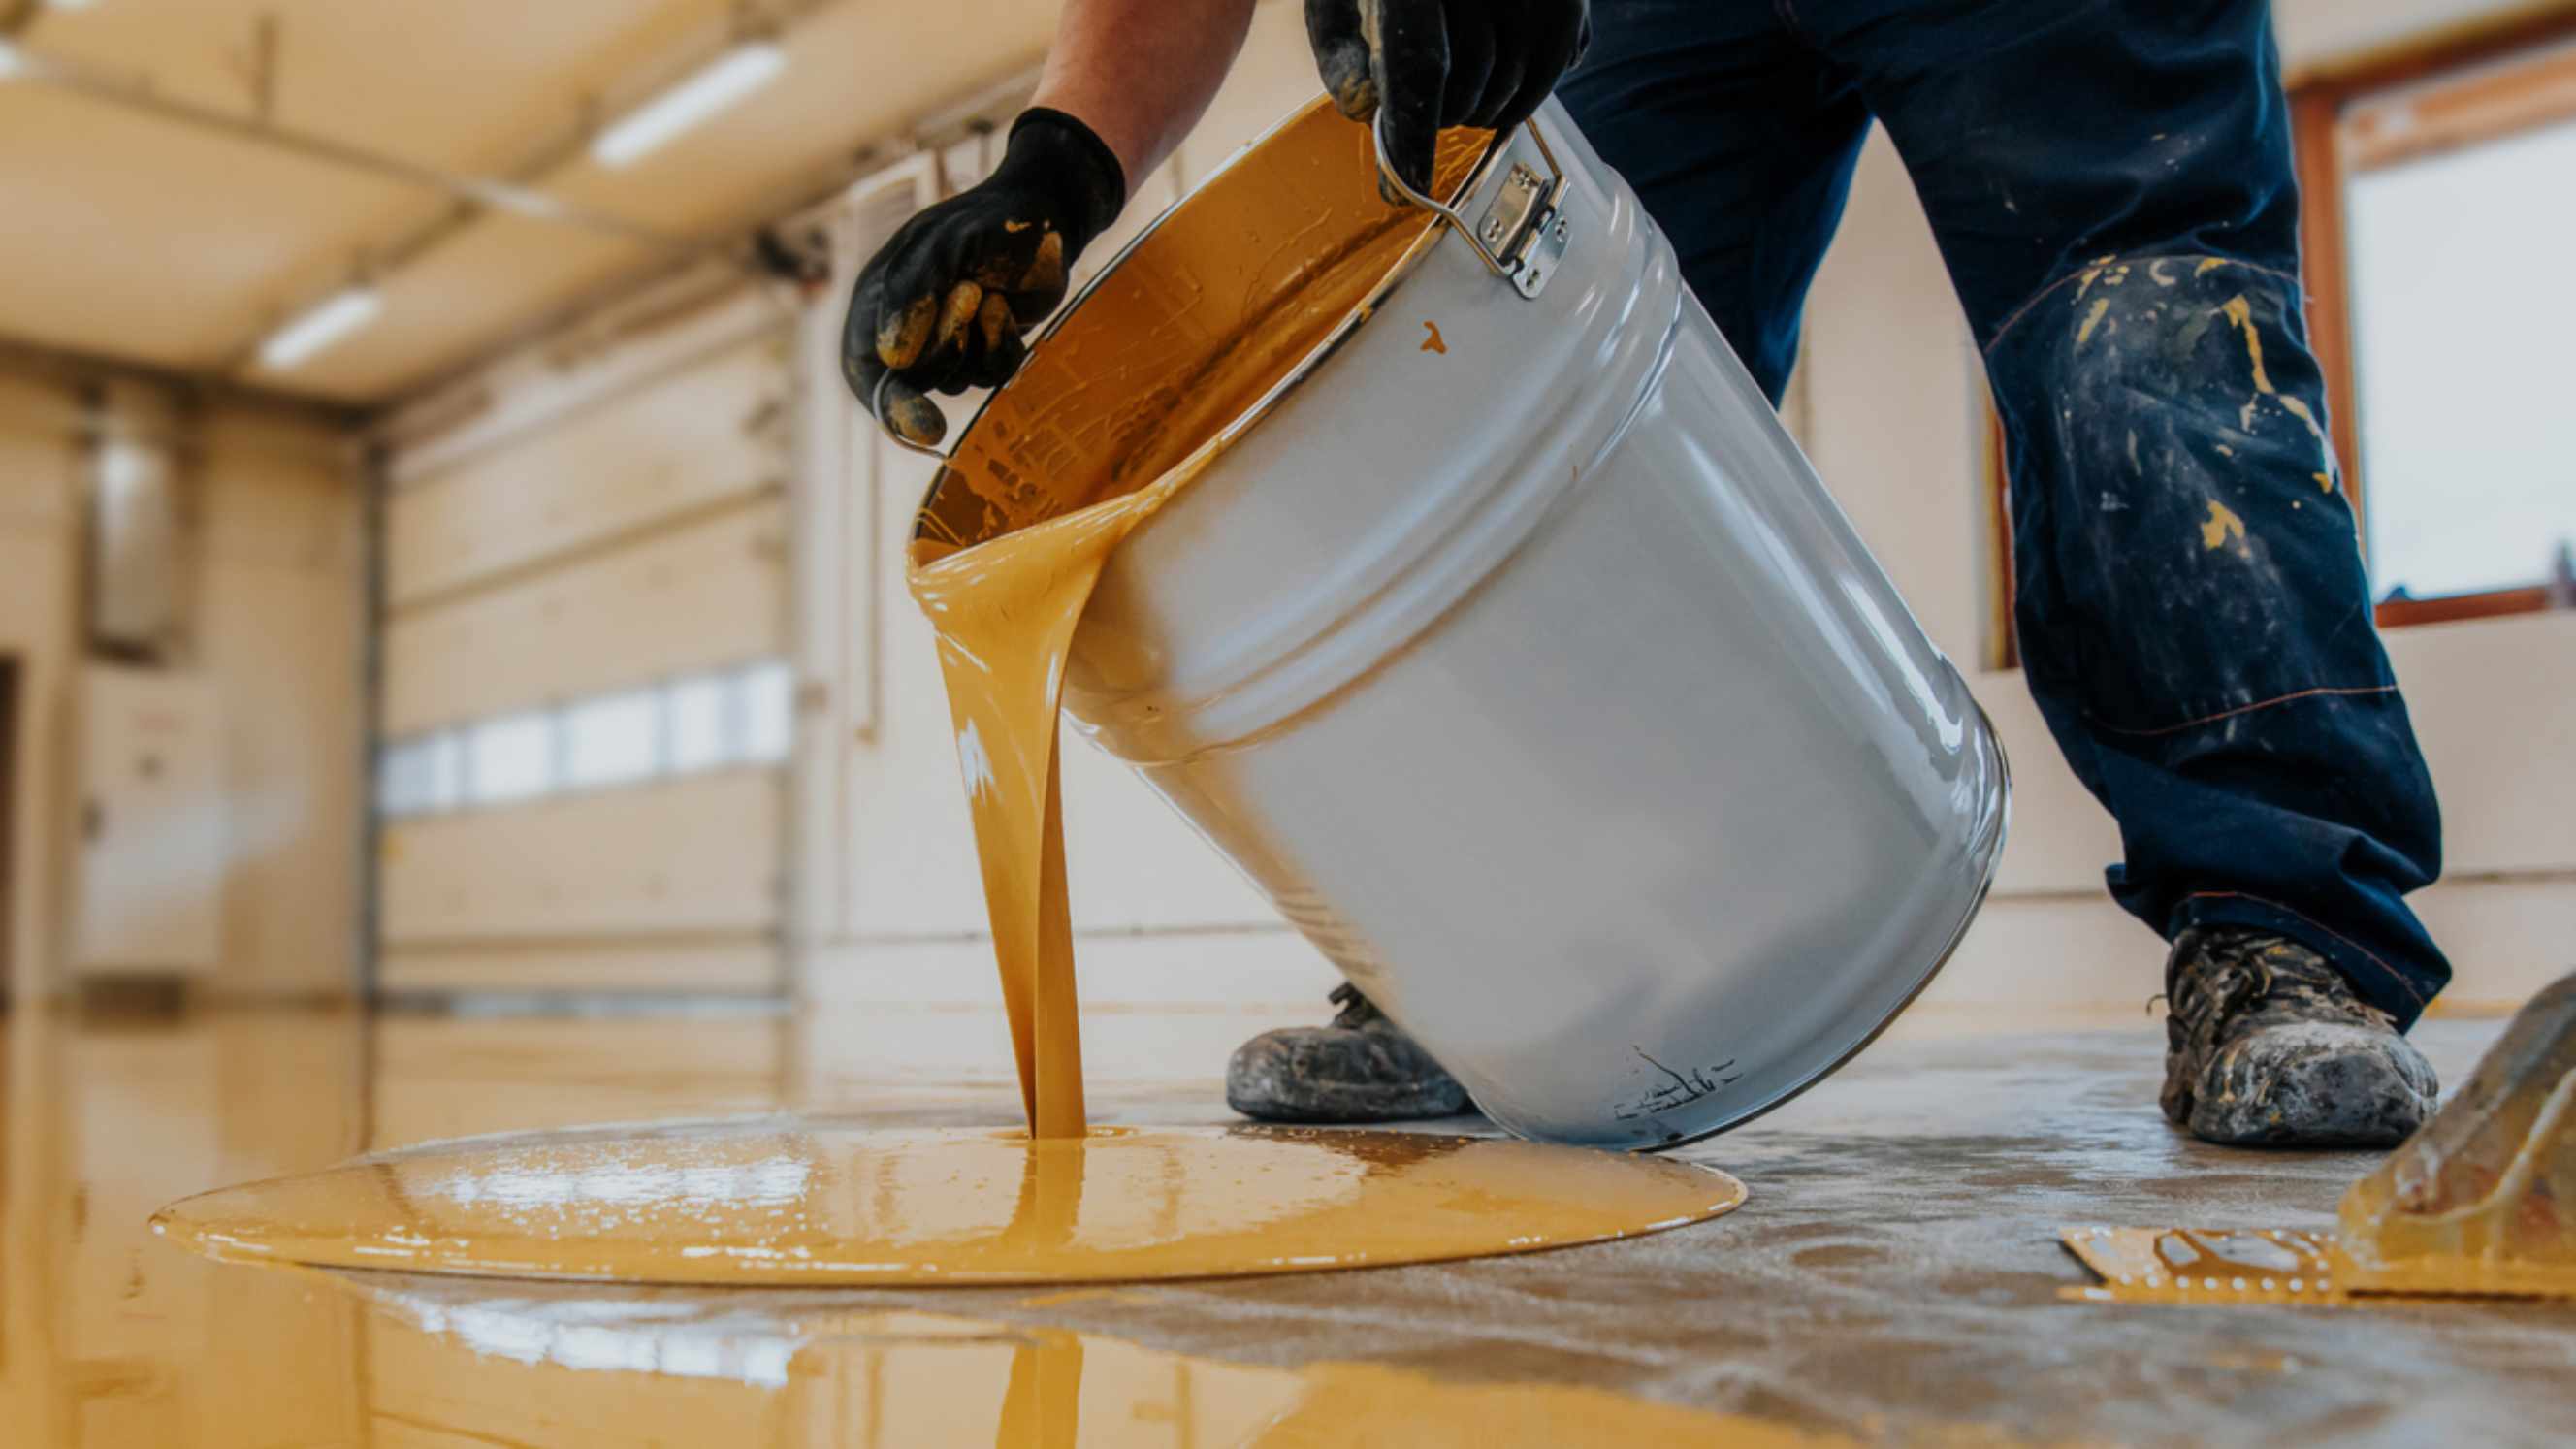 Polyester resin vs. epoxy resin - A worker applying a yellow epoxy resin bucket on floor for the final coat